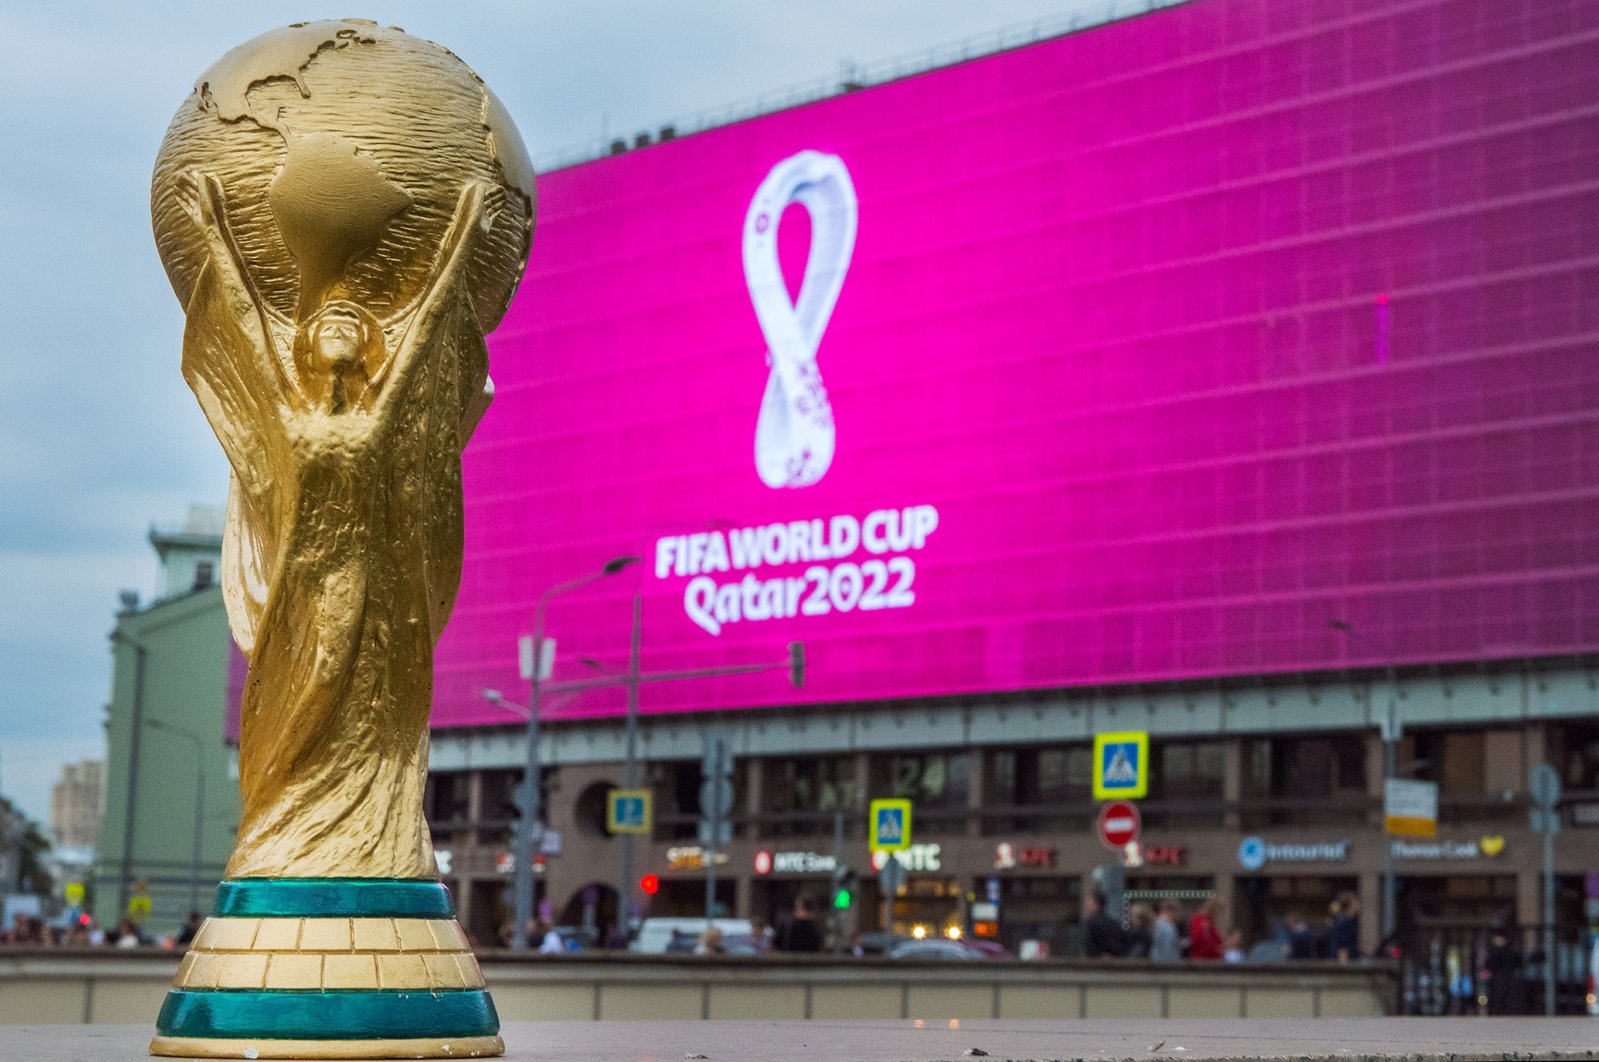 A replica of the World Cup trophy is backdropped by the pink logo of FIFA World Cup 2022, Sep. 4, 2019, Moscow, Russia. (Shutterstock Photo)